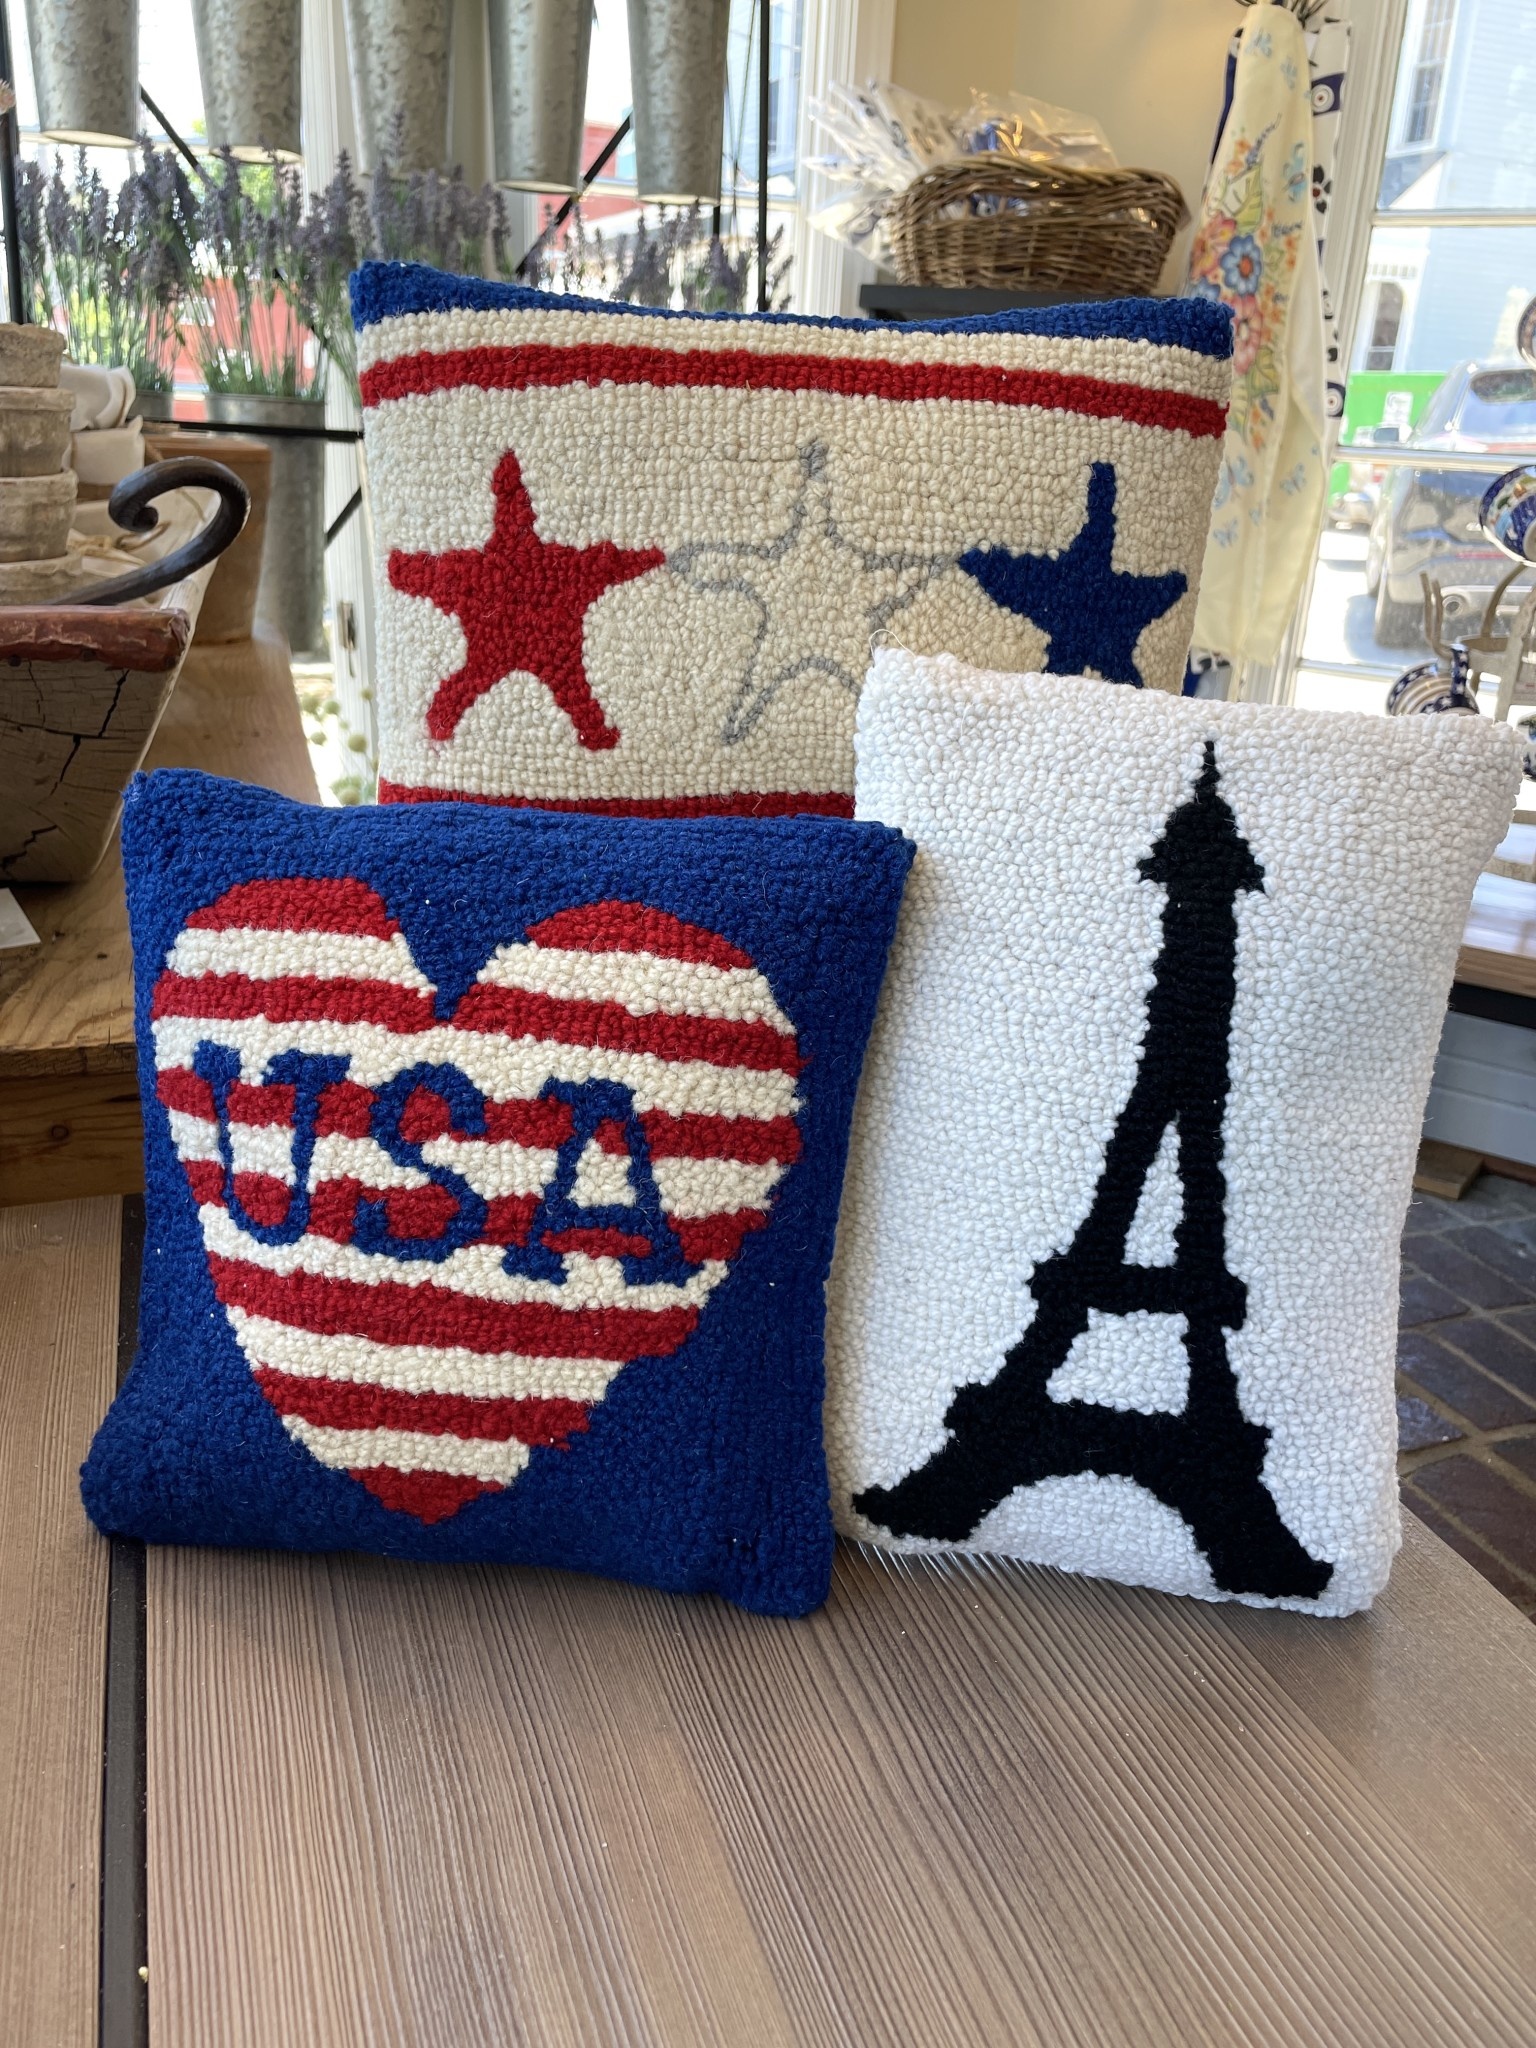 Patriotic USA LOVE Hook Pillow - 12 x 12. PERFECT FOR YOUR HOME!